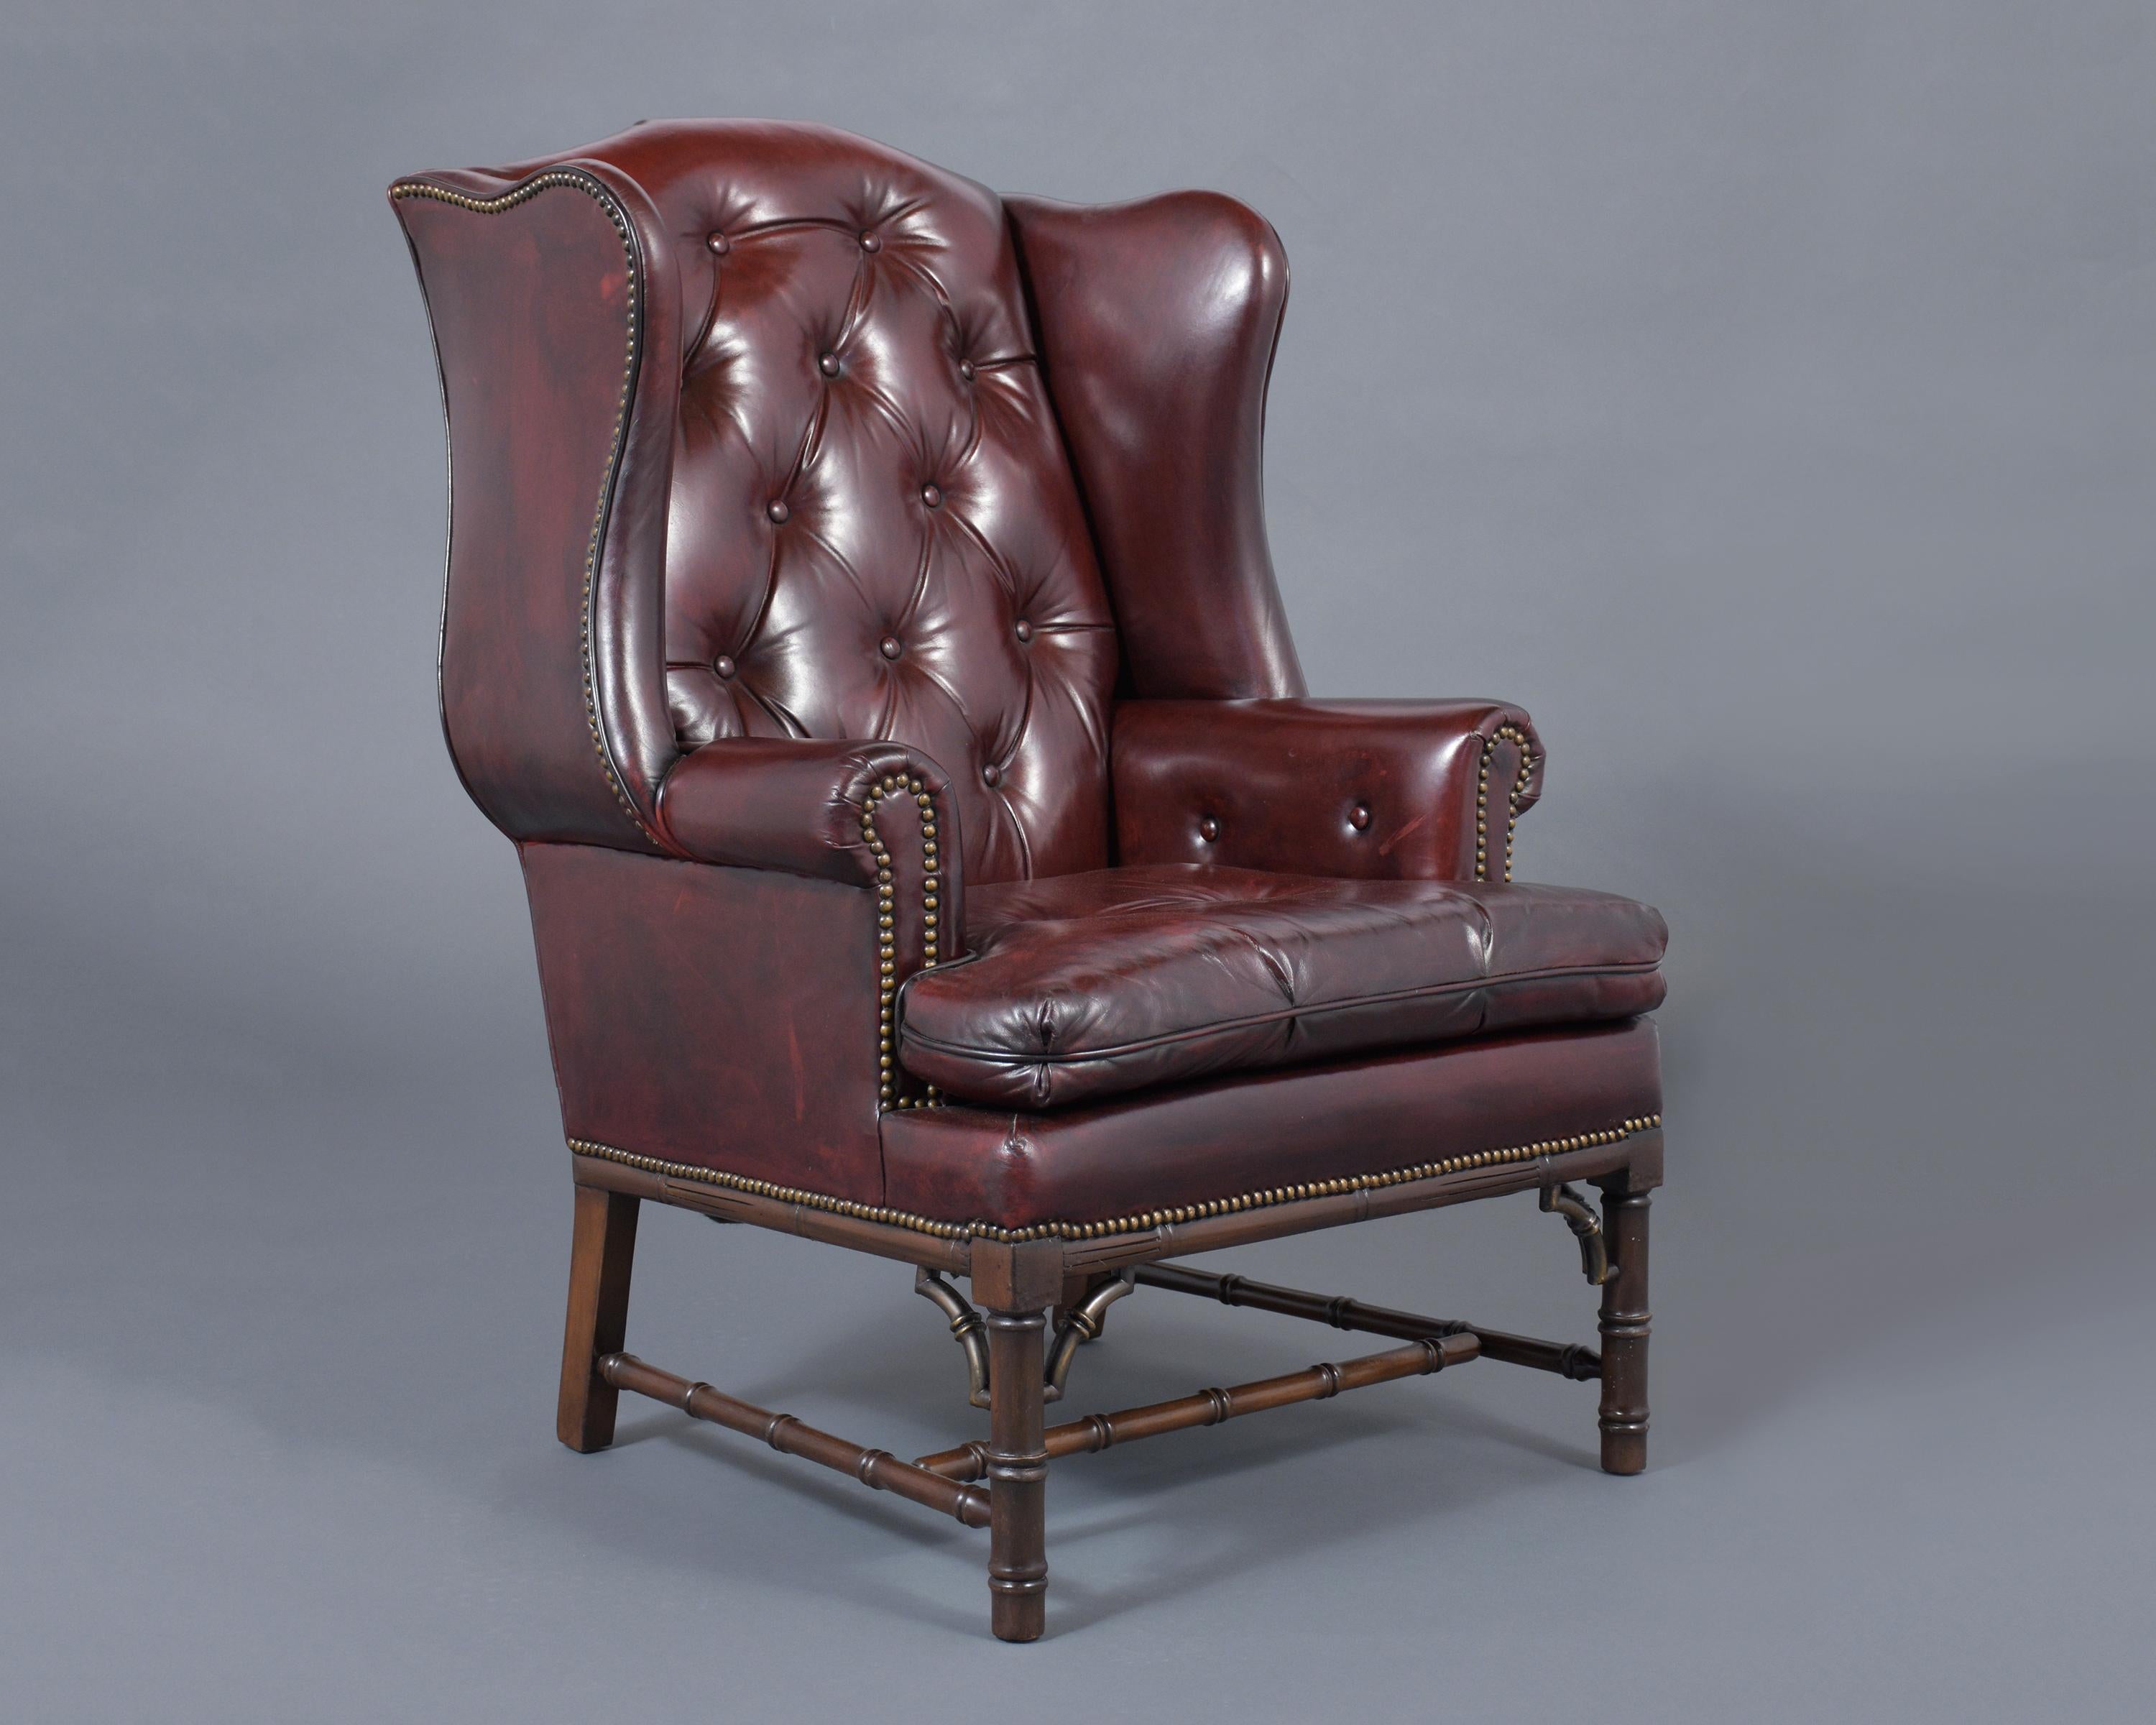 A 1970's wingback chair and ottoman has been professionally restored and handcrafted out of mahogany wood and features a leather upholstery tufted design with brass nailheads trim details, has been newly dyed in a dark burgundy color and waxed &